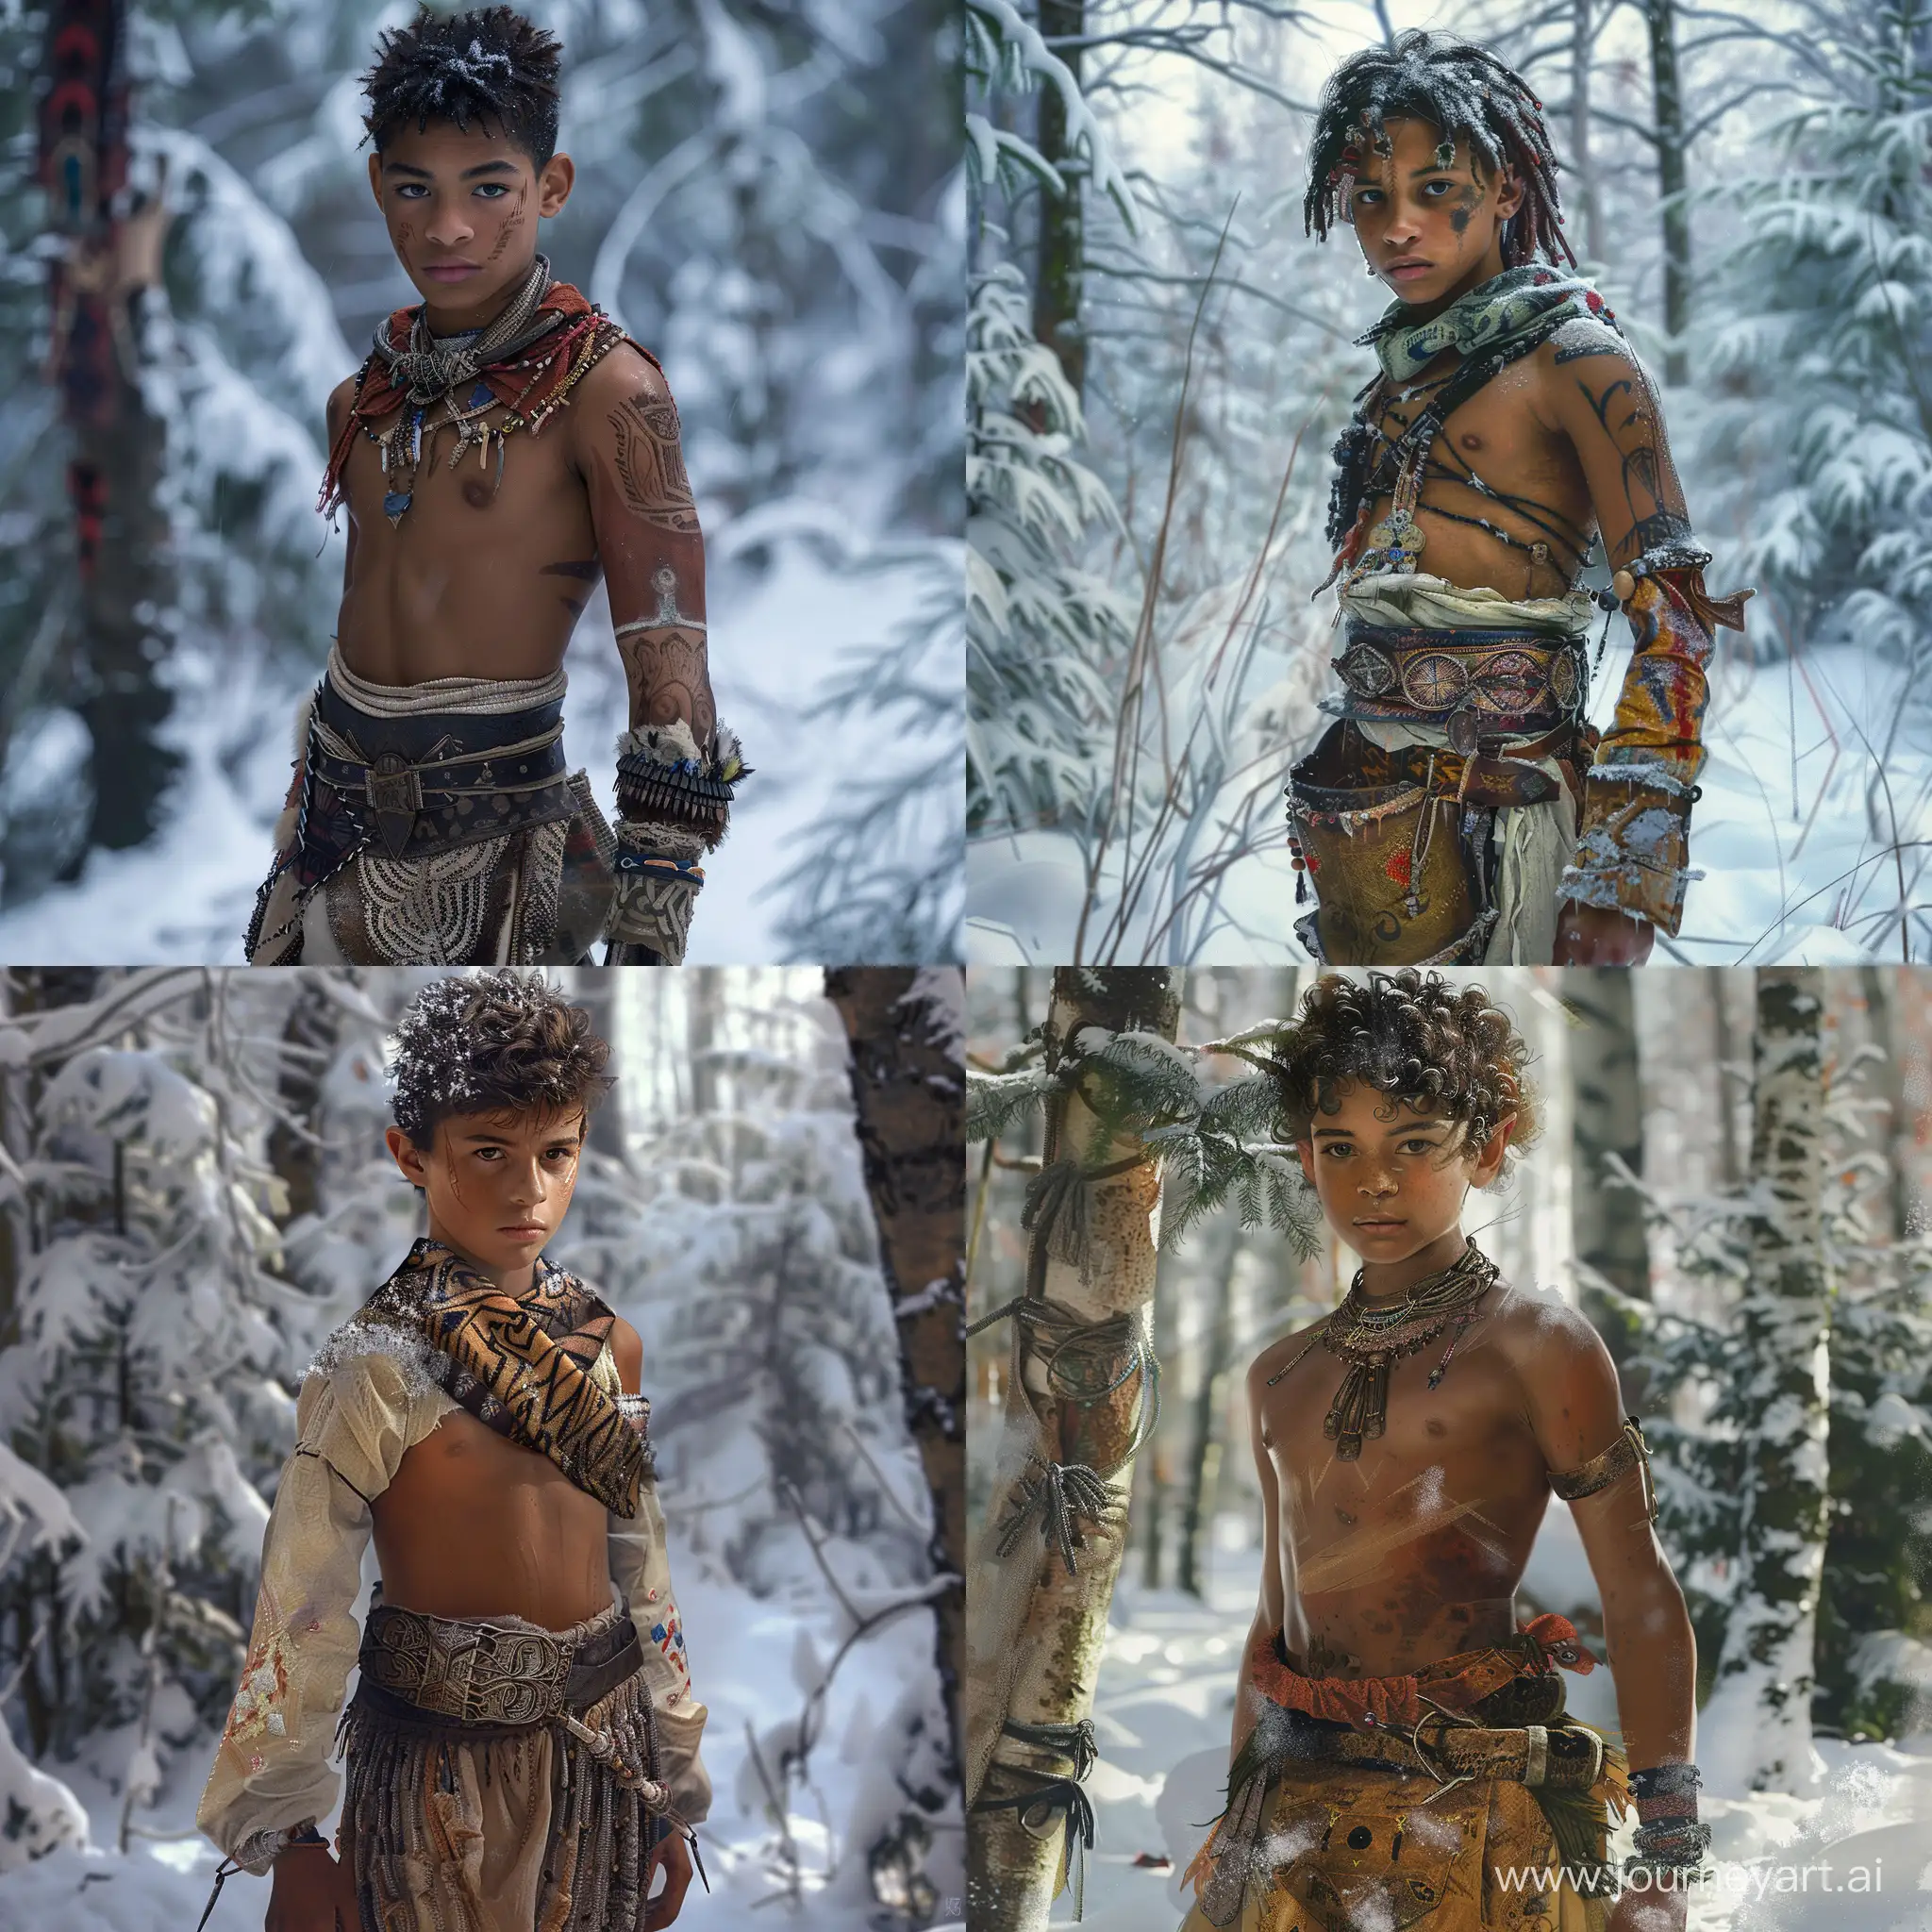 Mystical-15YearOld-Argonian-in-Snowy-Forest-with-Tribal-Attire